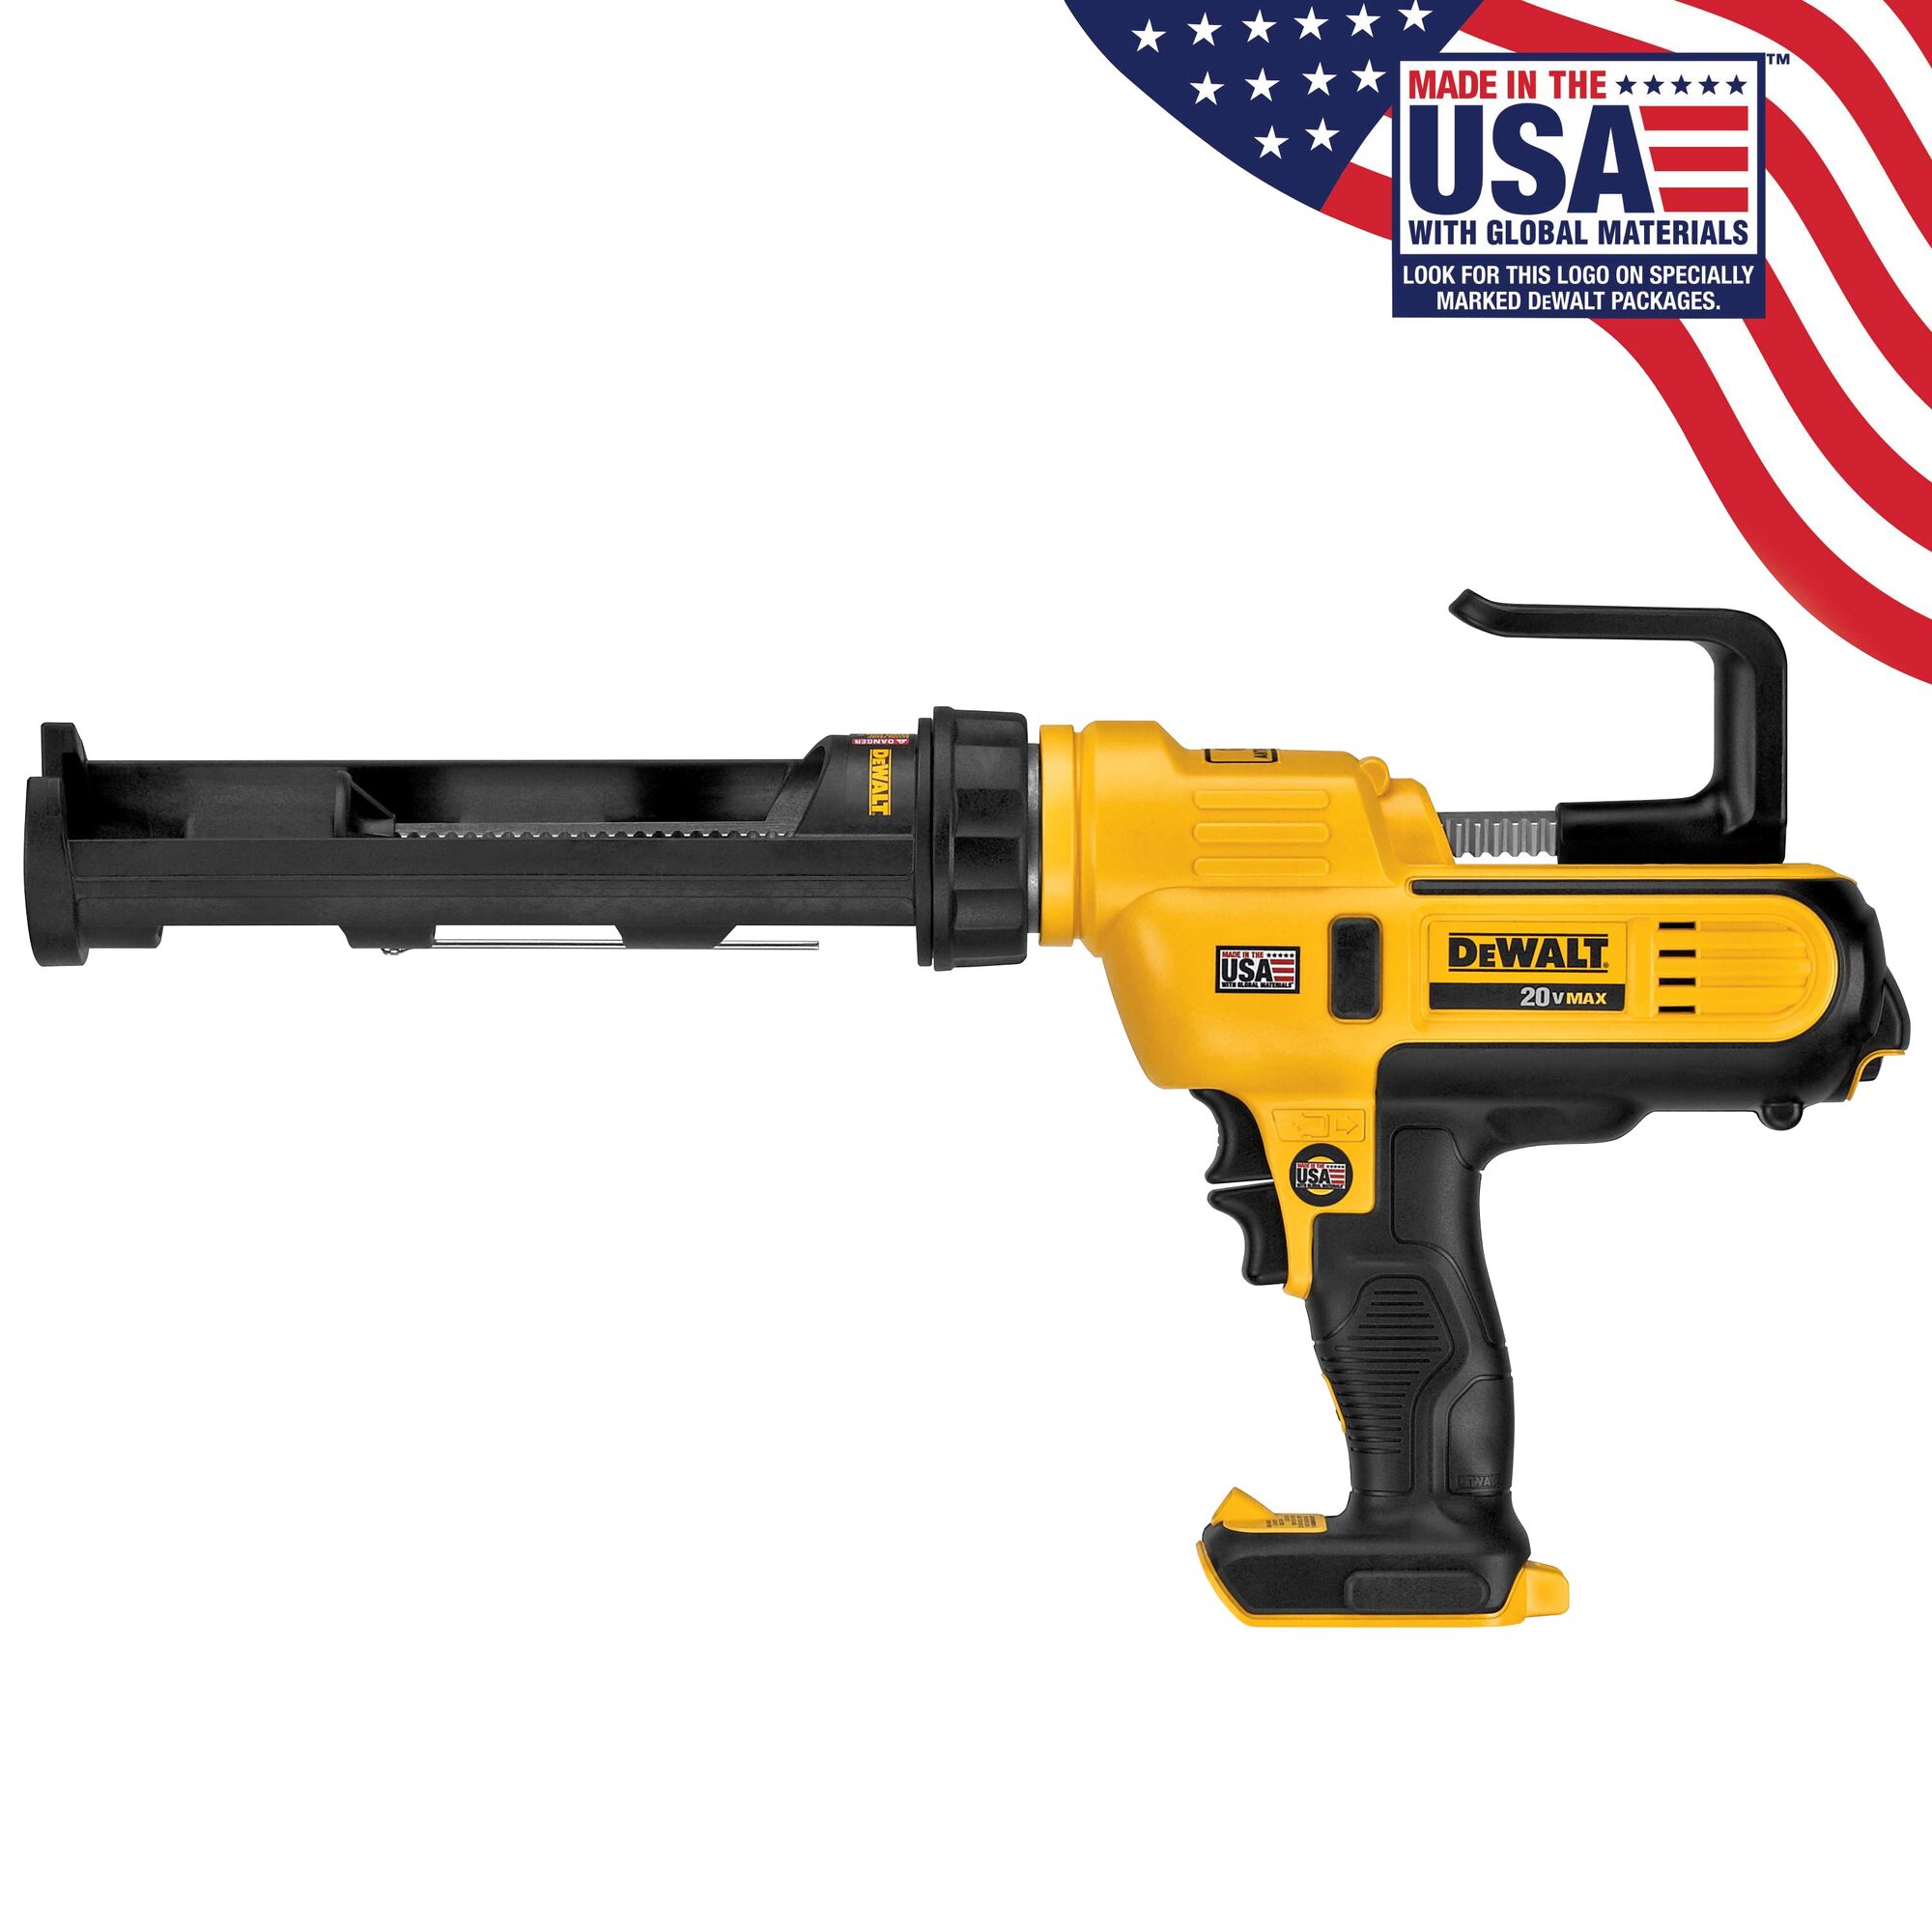  Electric Cordless Caulking Gun with 2000mA Li-Ion Battery,  Sealant Adhesive Gun, Perfect for Sealing and Filling with Silicone and  Other Adhesives, 4 Adjustable Speeds : Tools & Home Improvement